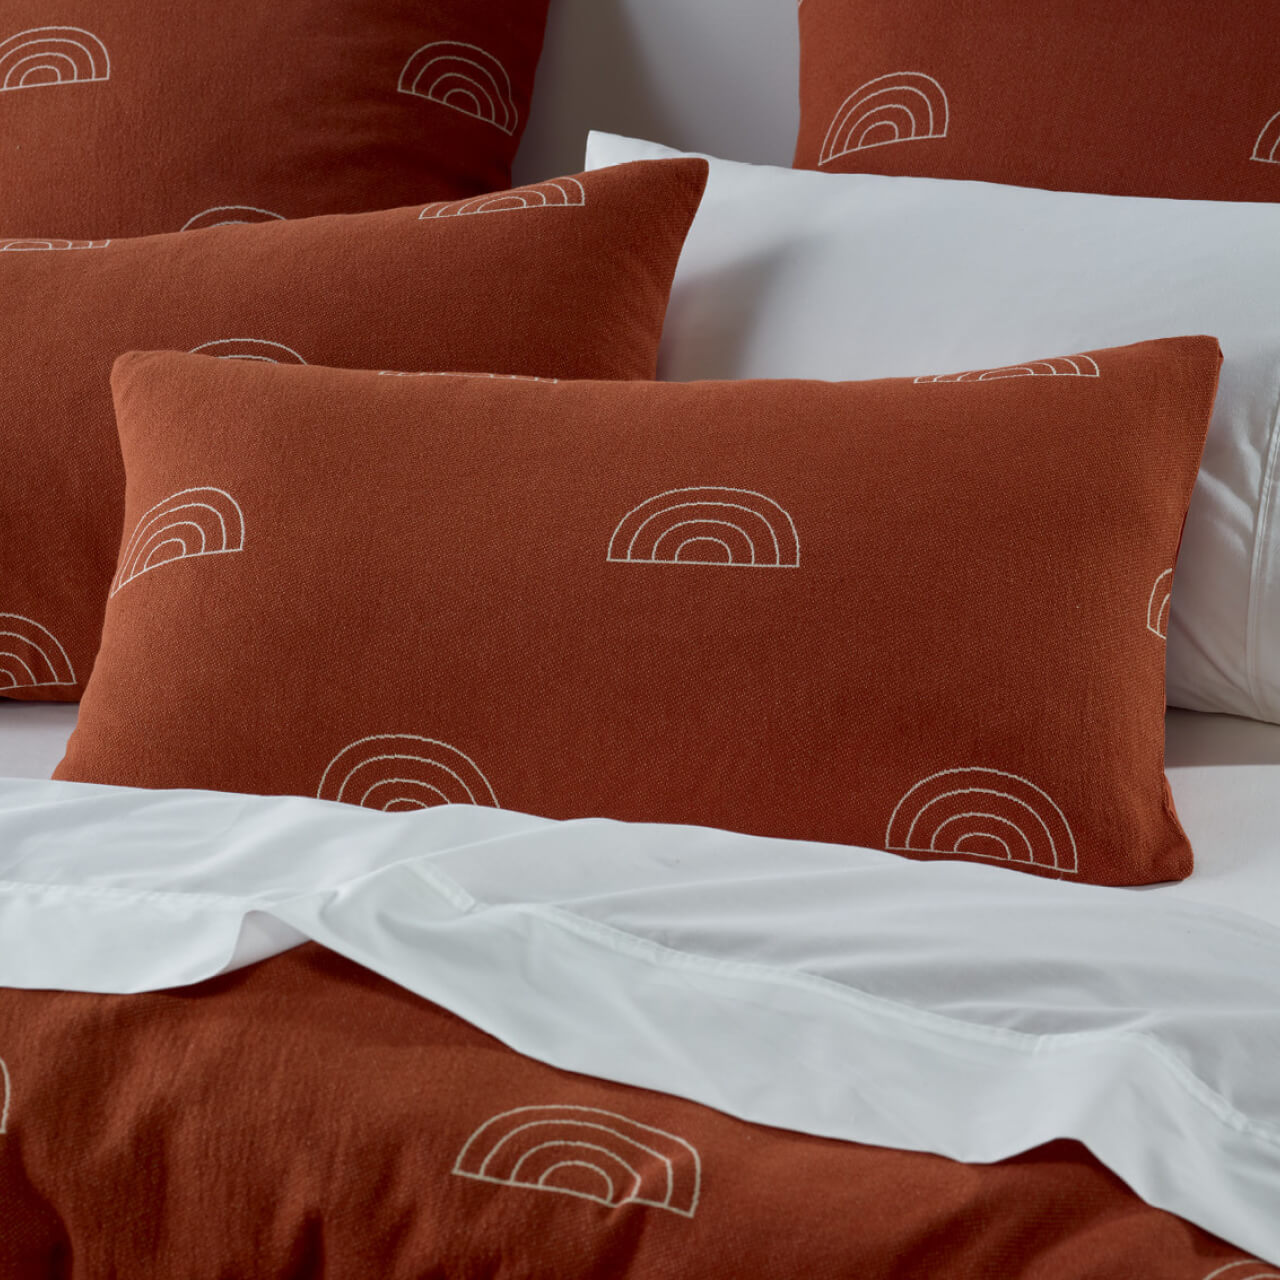 Close up shot of Arco pillowcases on bed